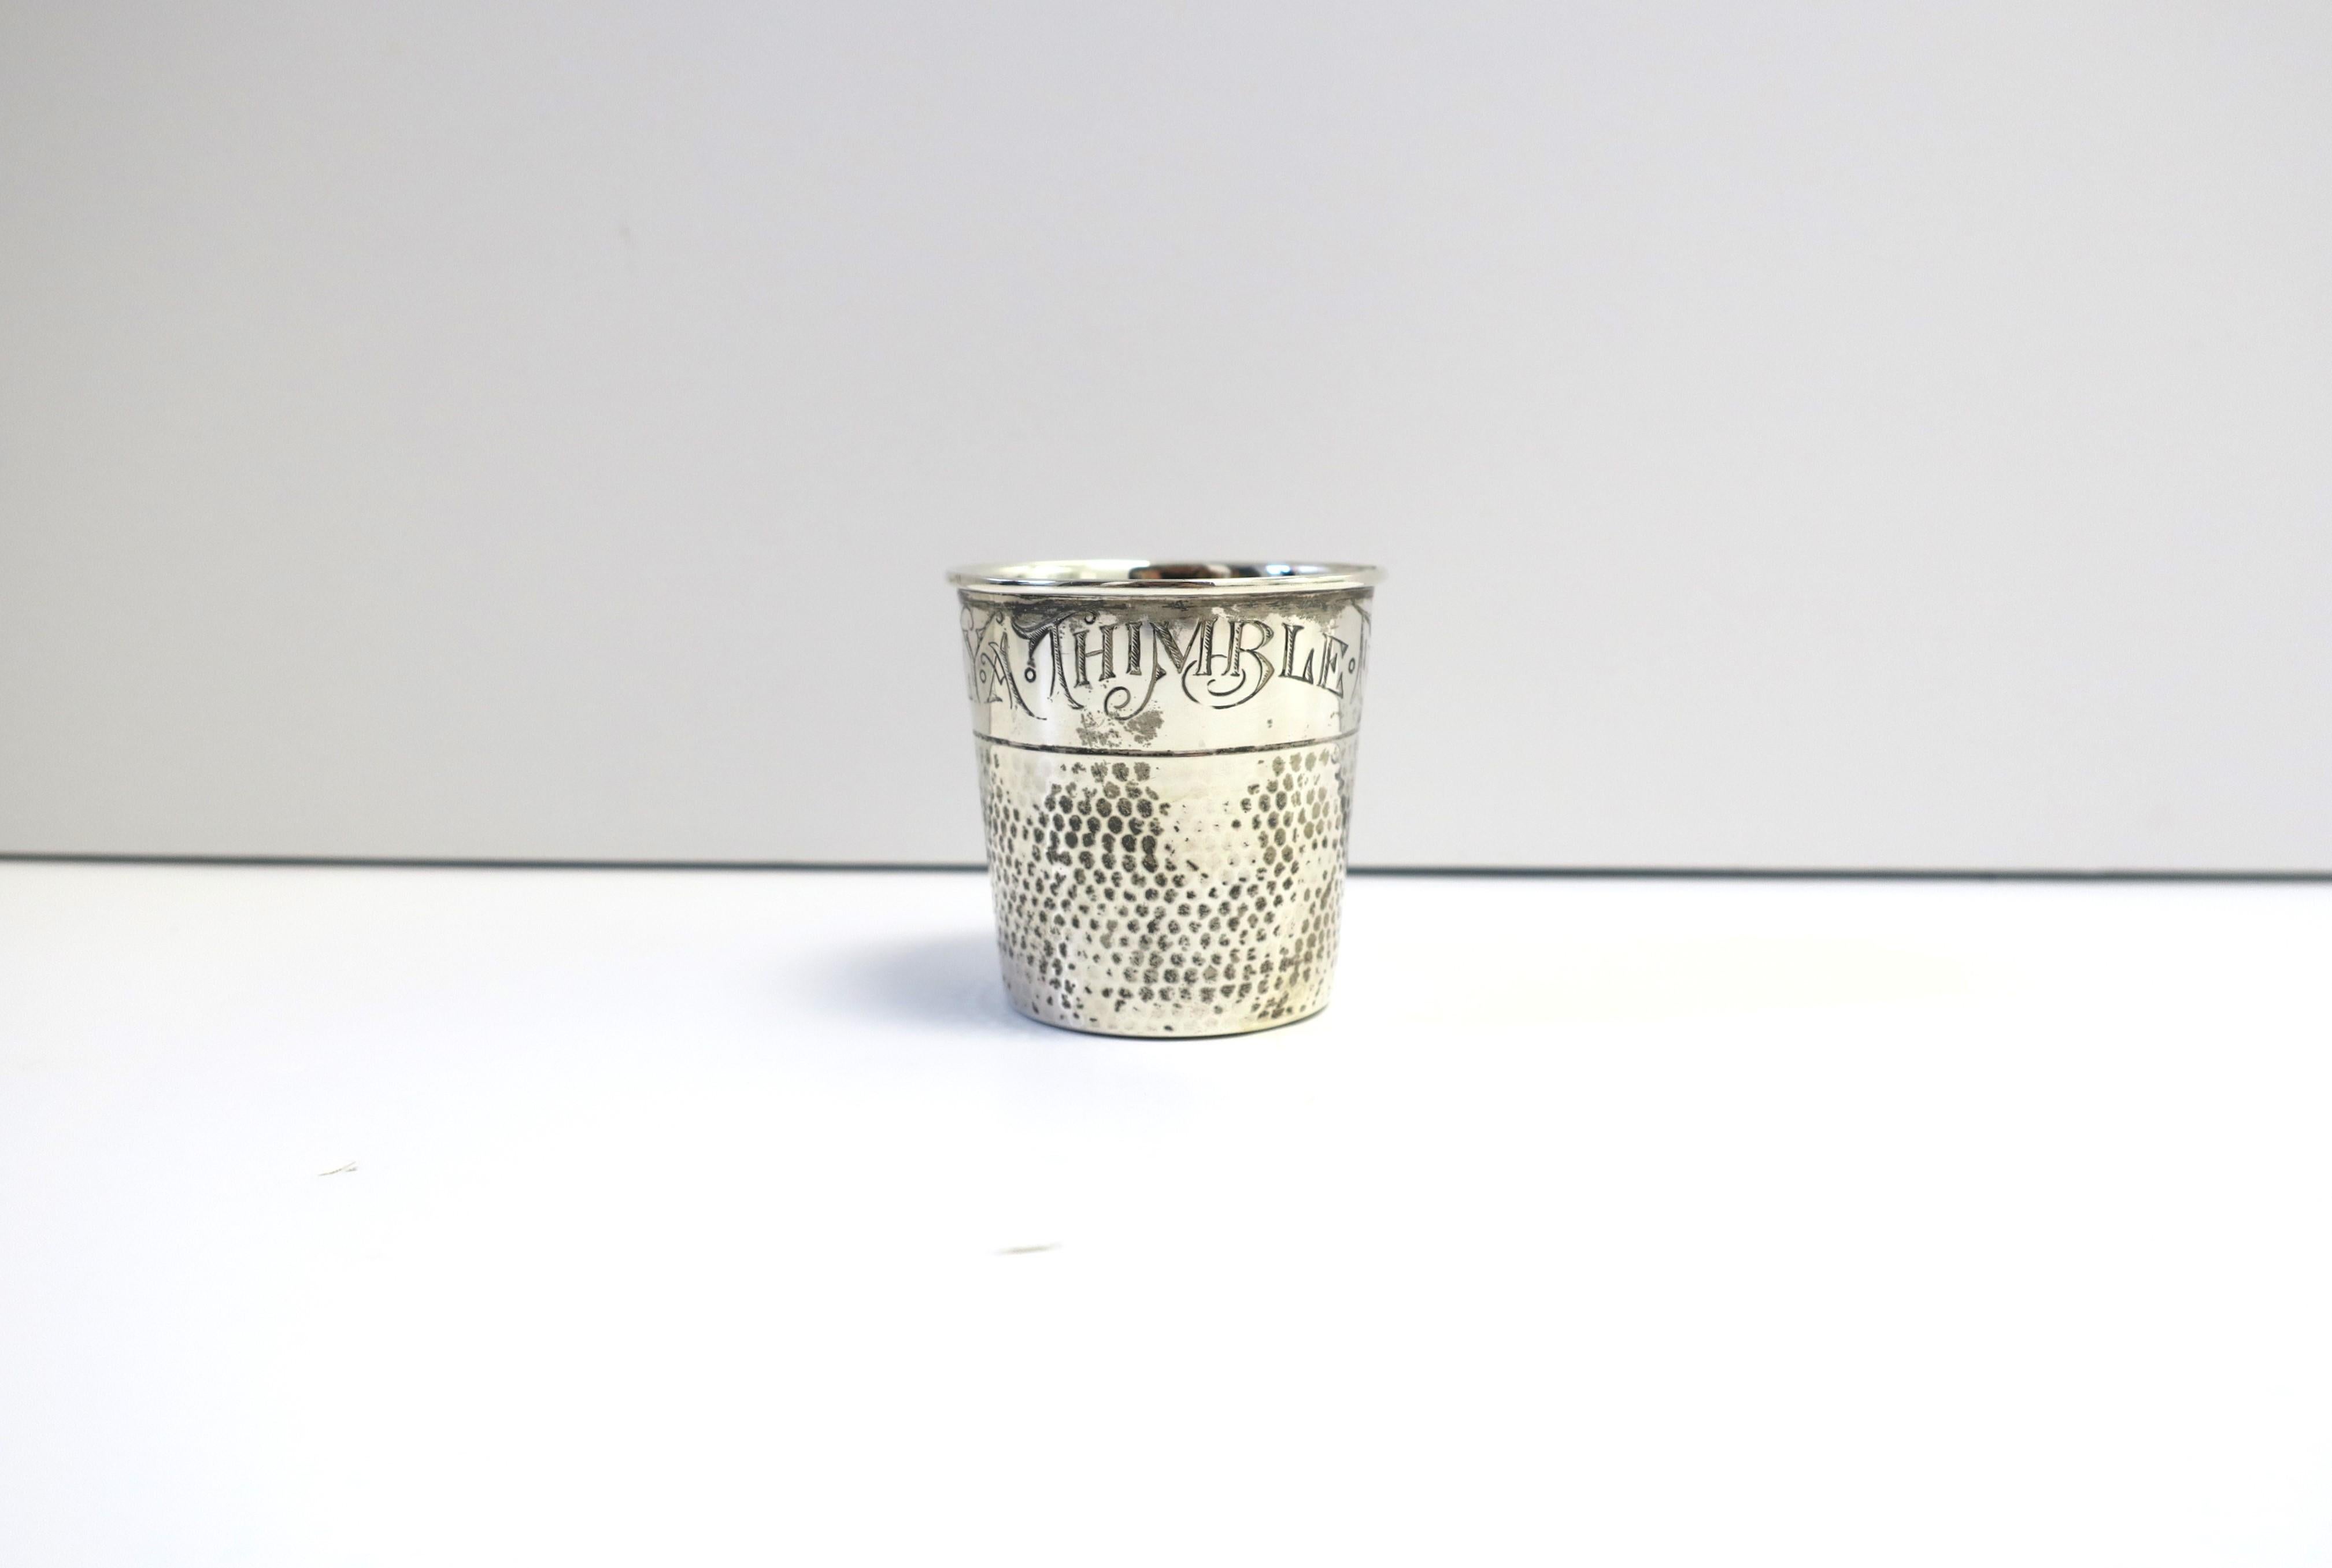 A sterling silver 'thimble' jigger shot glass, Art Nouveau period, by E.G. Webster & Sons, circa late-19th century, USA. Piece, in the shape of the thimble, and of the Art Nouveau period, with engraving, a play on the expression, ‘Just a Thimble